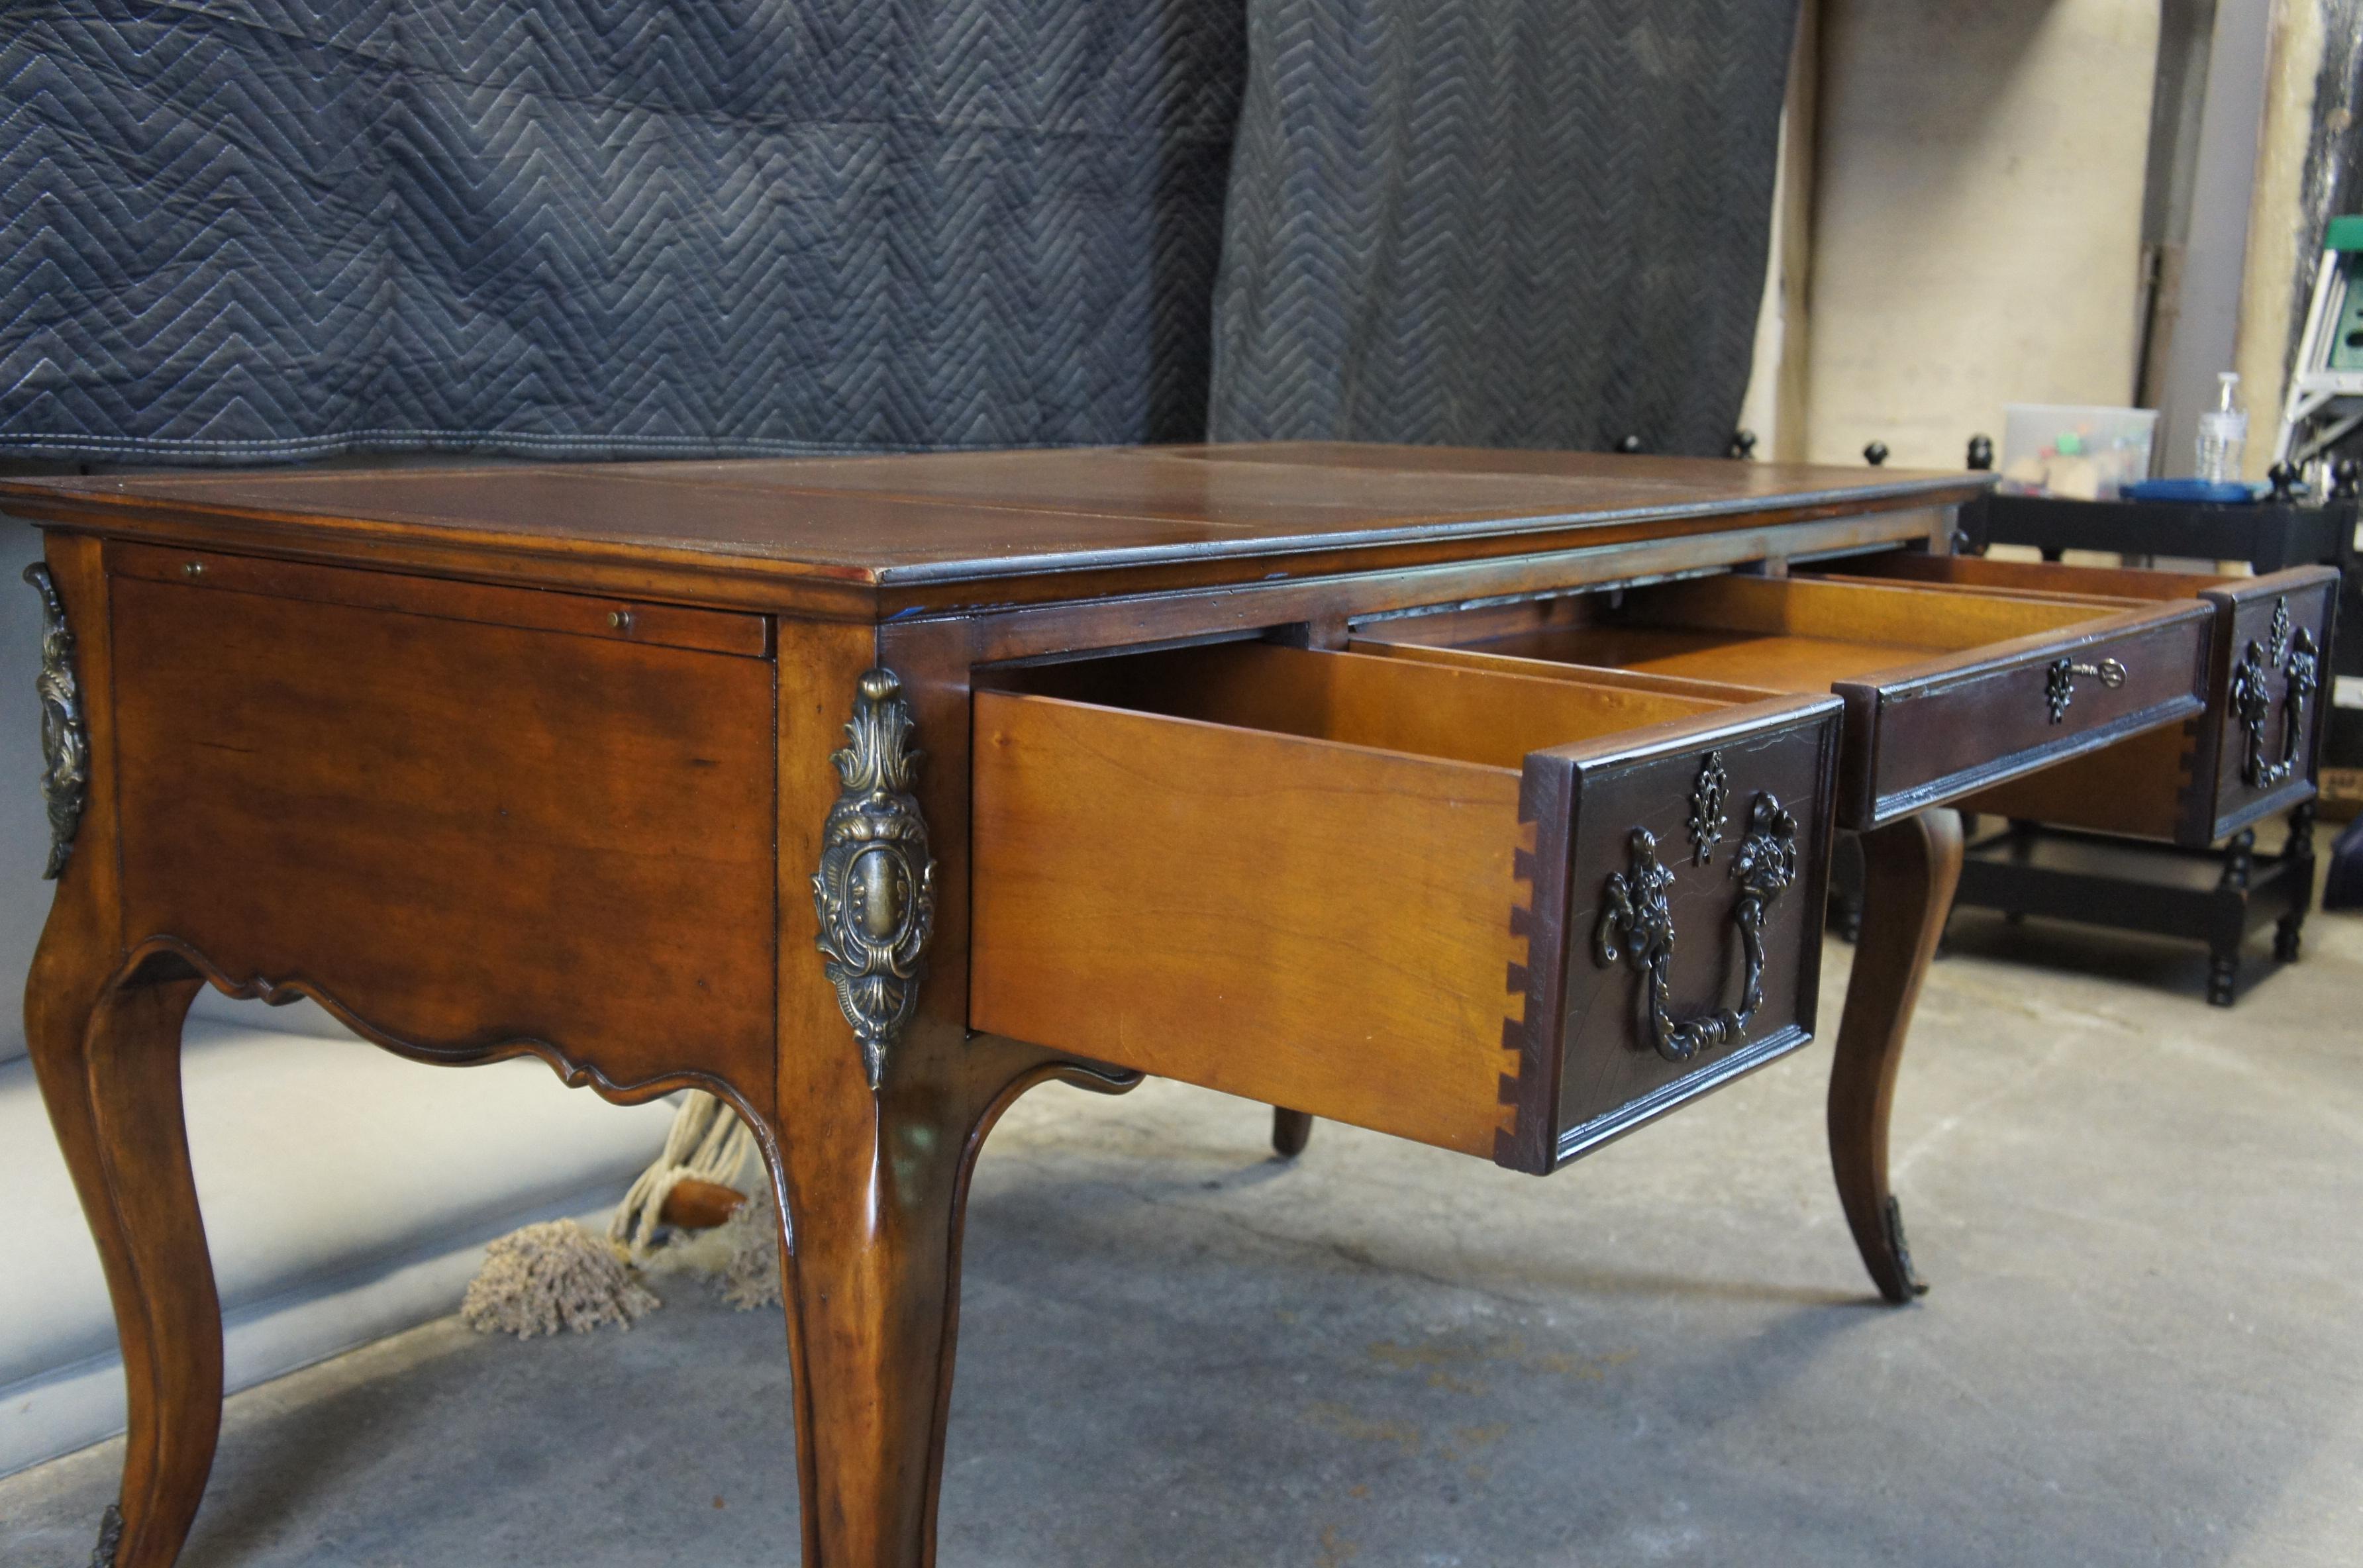 French Provincial Drexel Heritage Love Letter Desk 311-910 French Country Cherry Library Leather